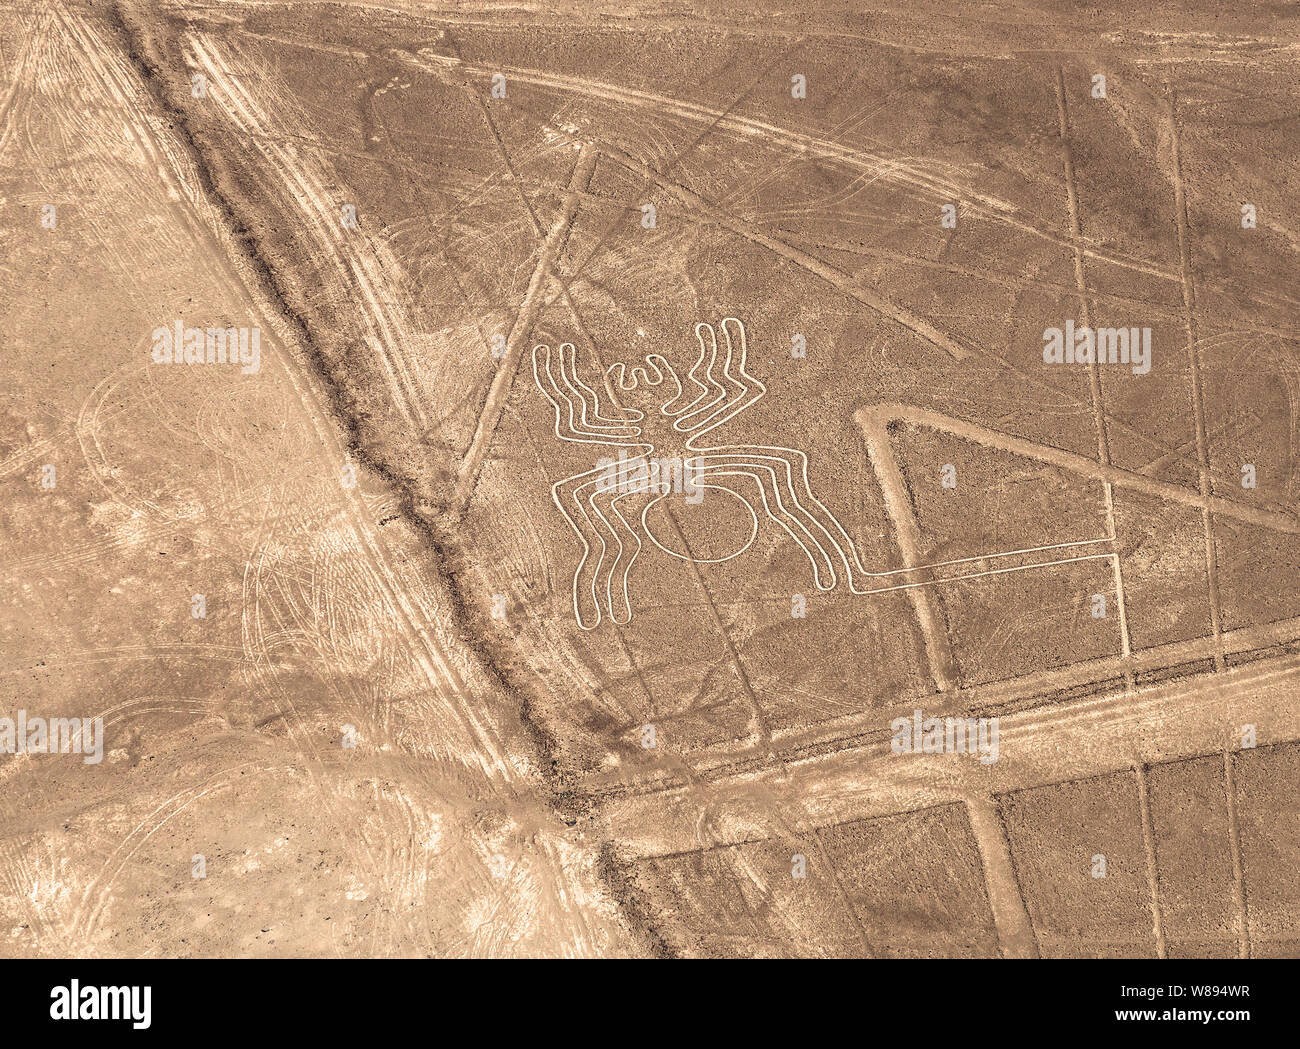 Aerial view of the spider geoglyph drawing in the peruvian coastal desert known as the mysterious Nazca Lines near Nazca city, Peru. Stock Photo